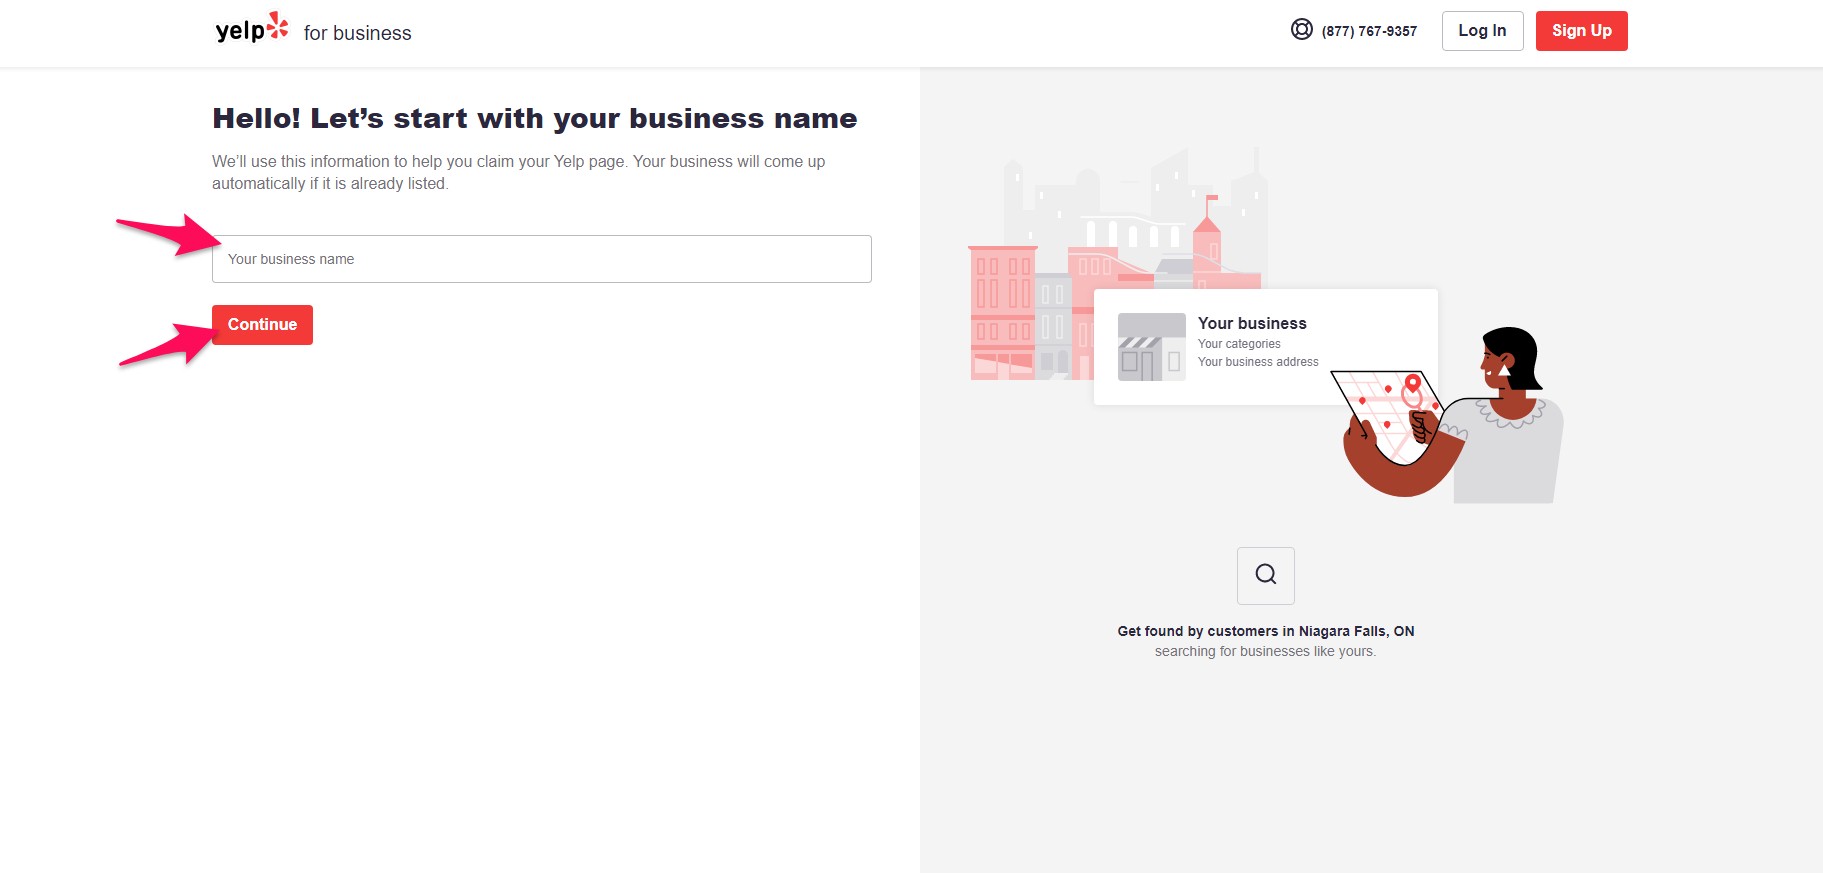 Enter your business name